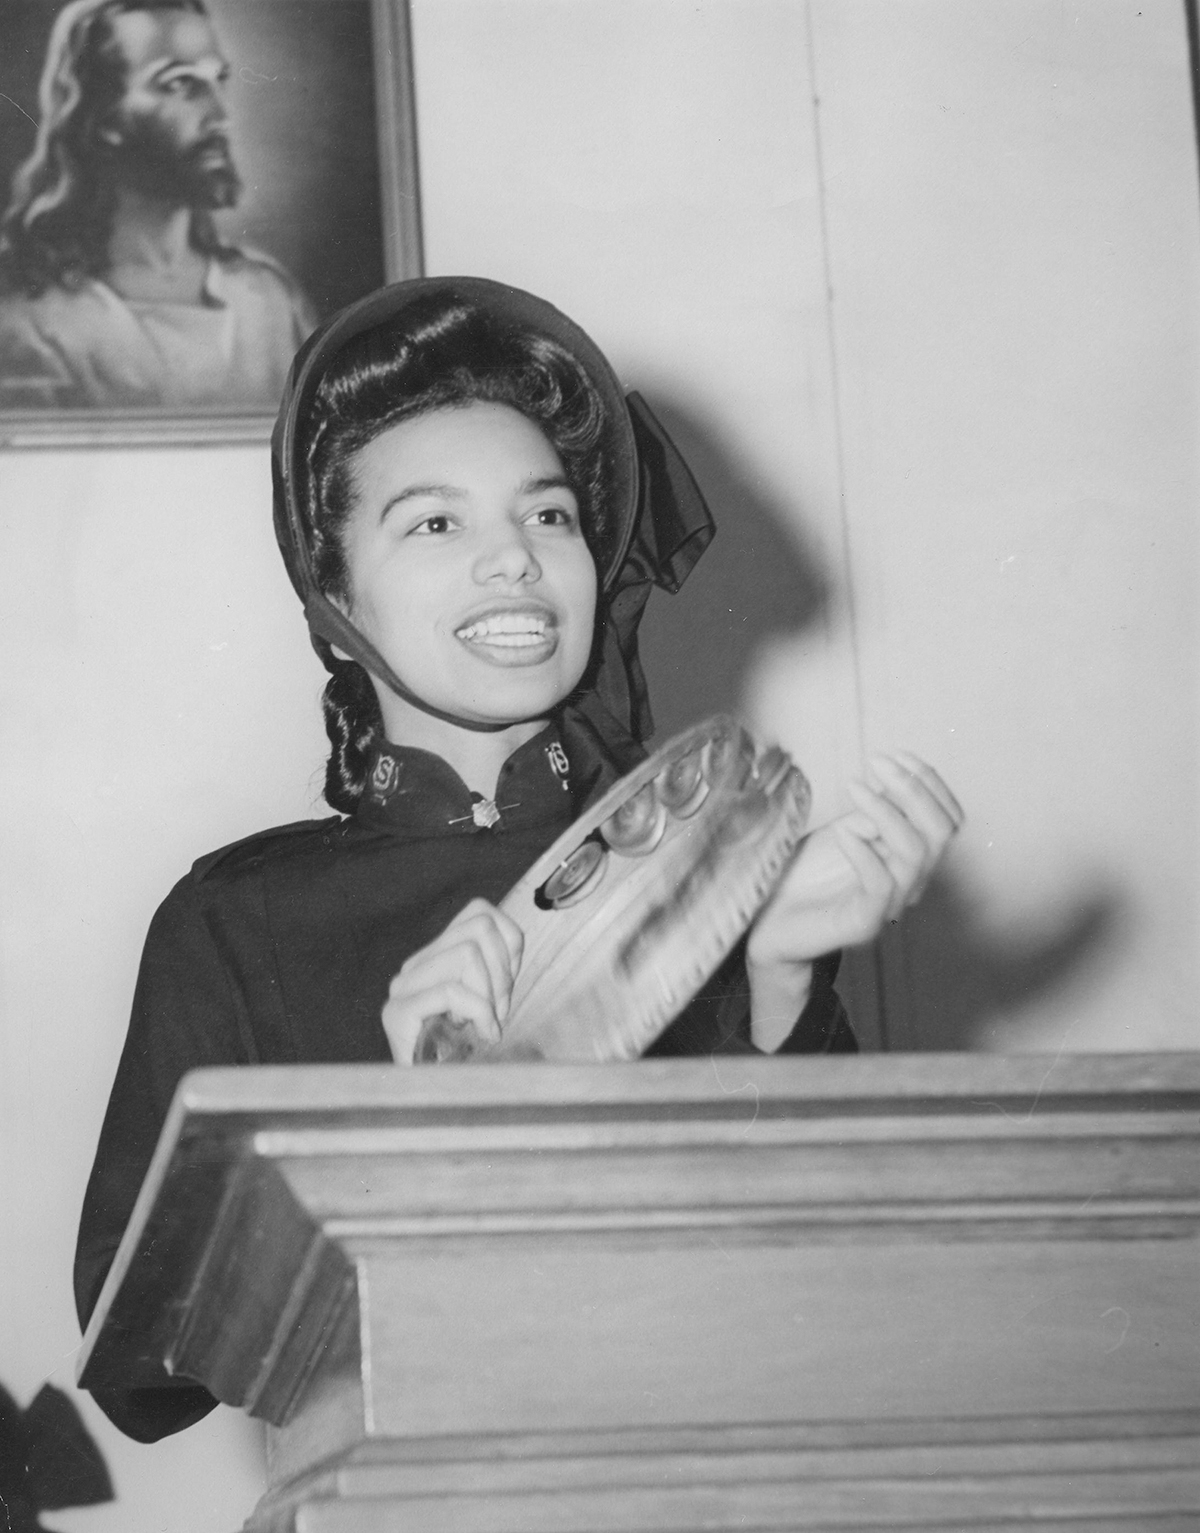 Photo of Norma Roberts during her posting in Little Rock, Arkansas in the 1950s.